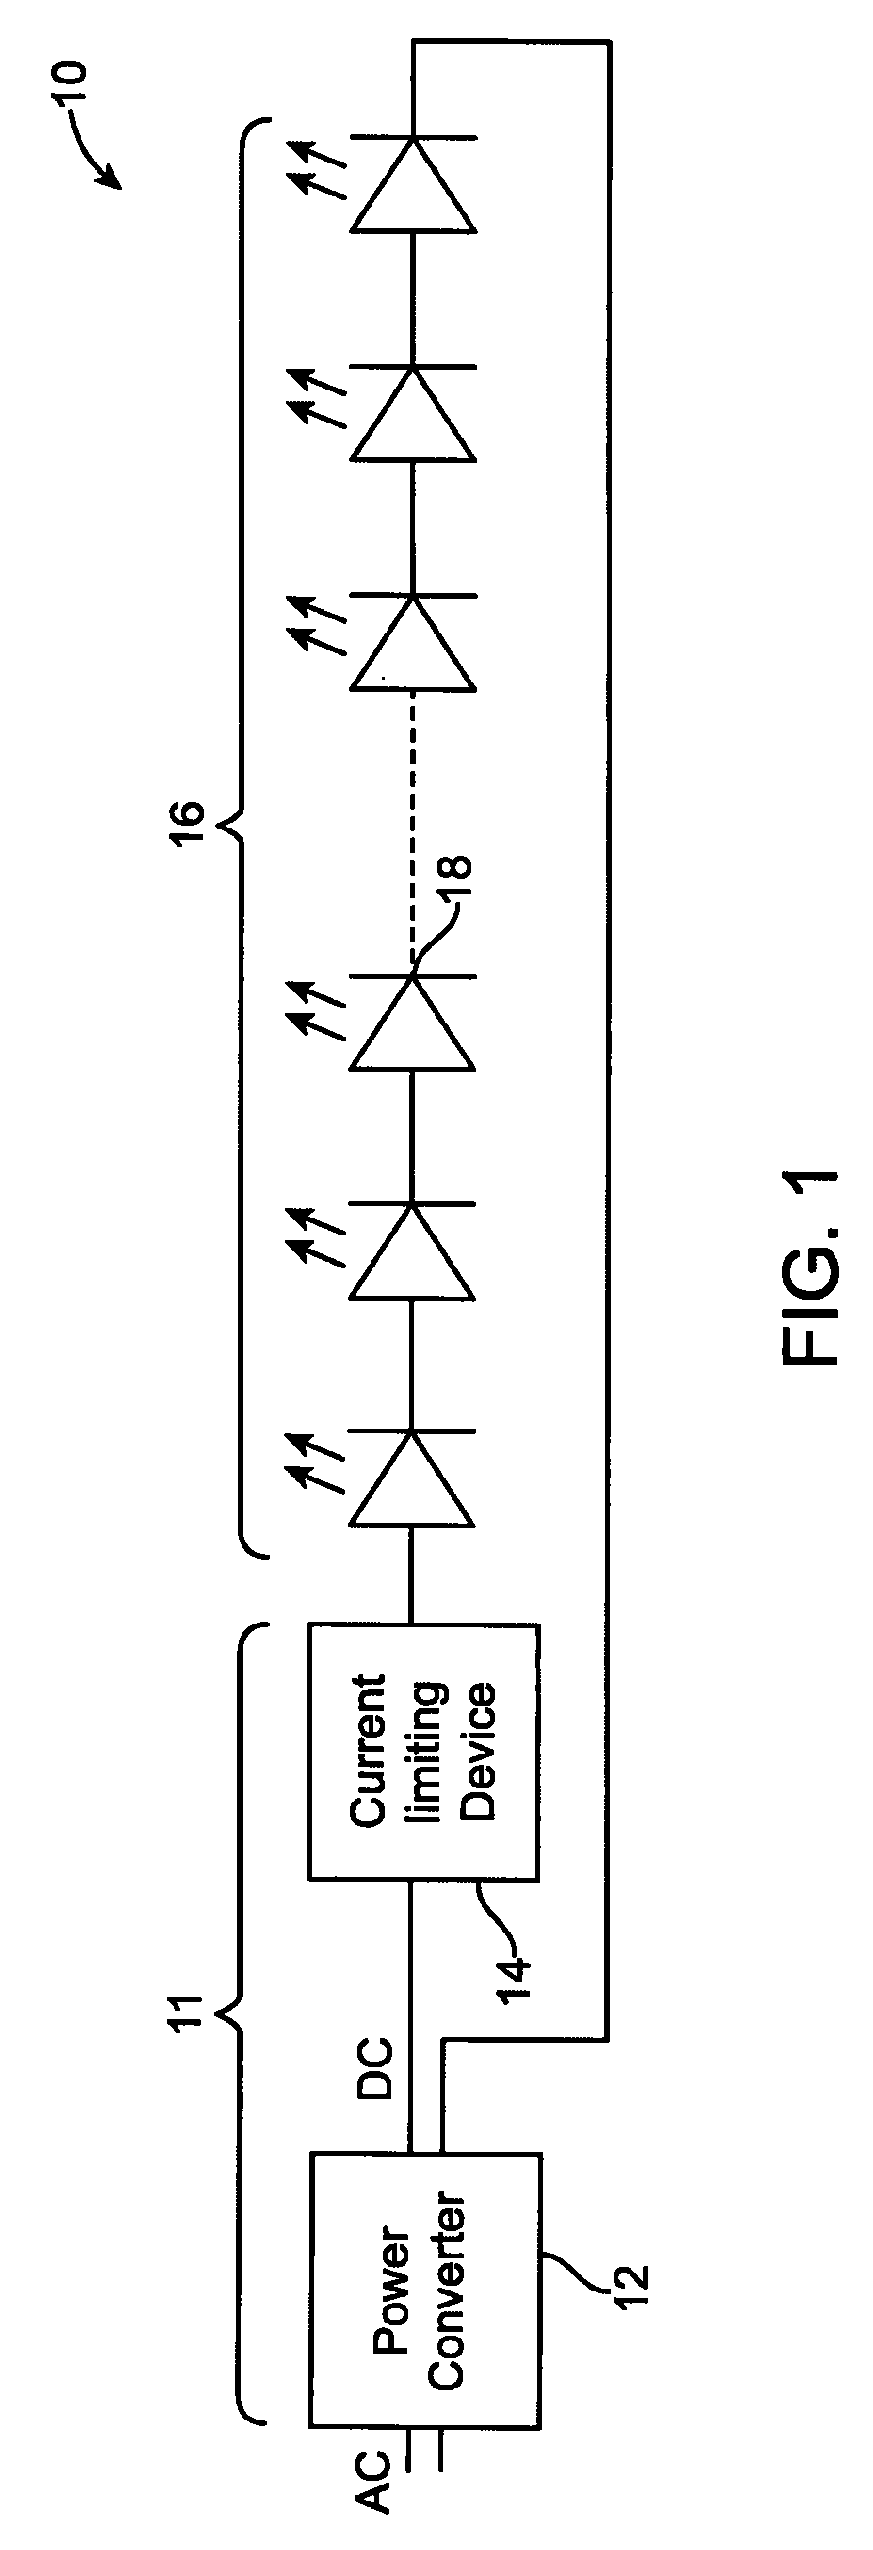 Solid state lighting apparatus